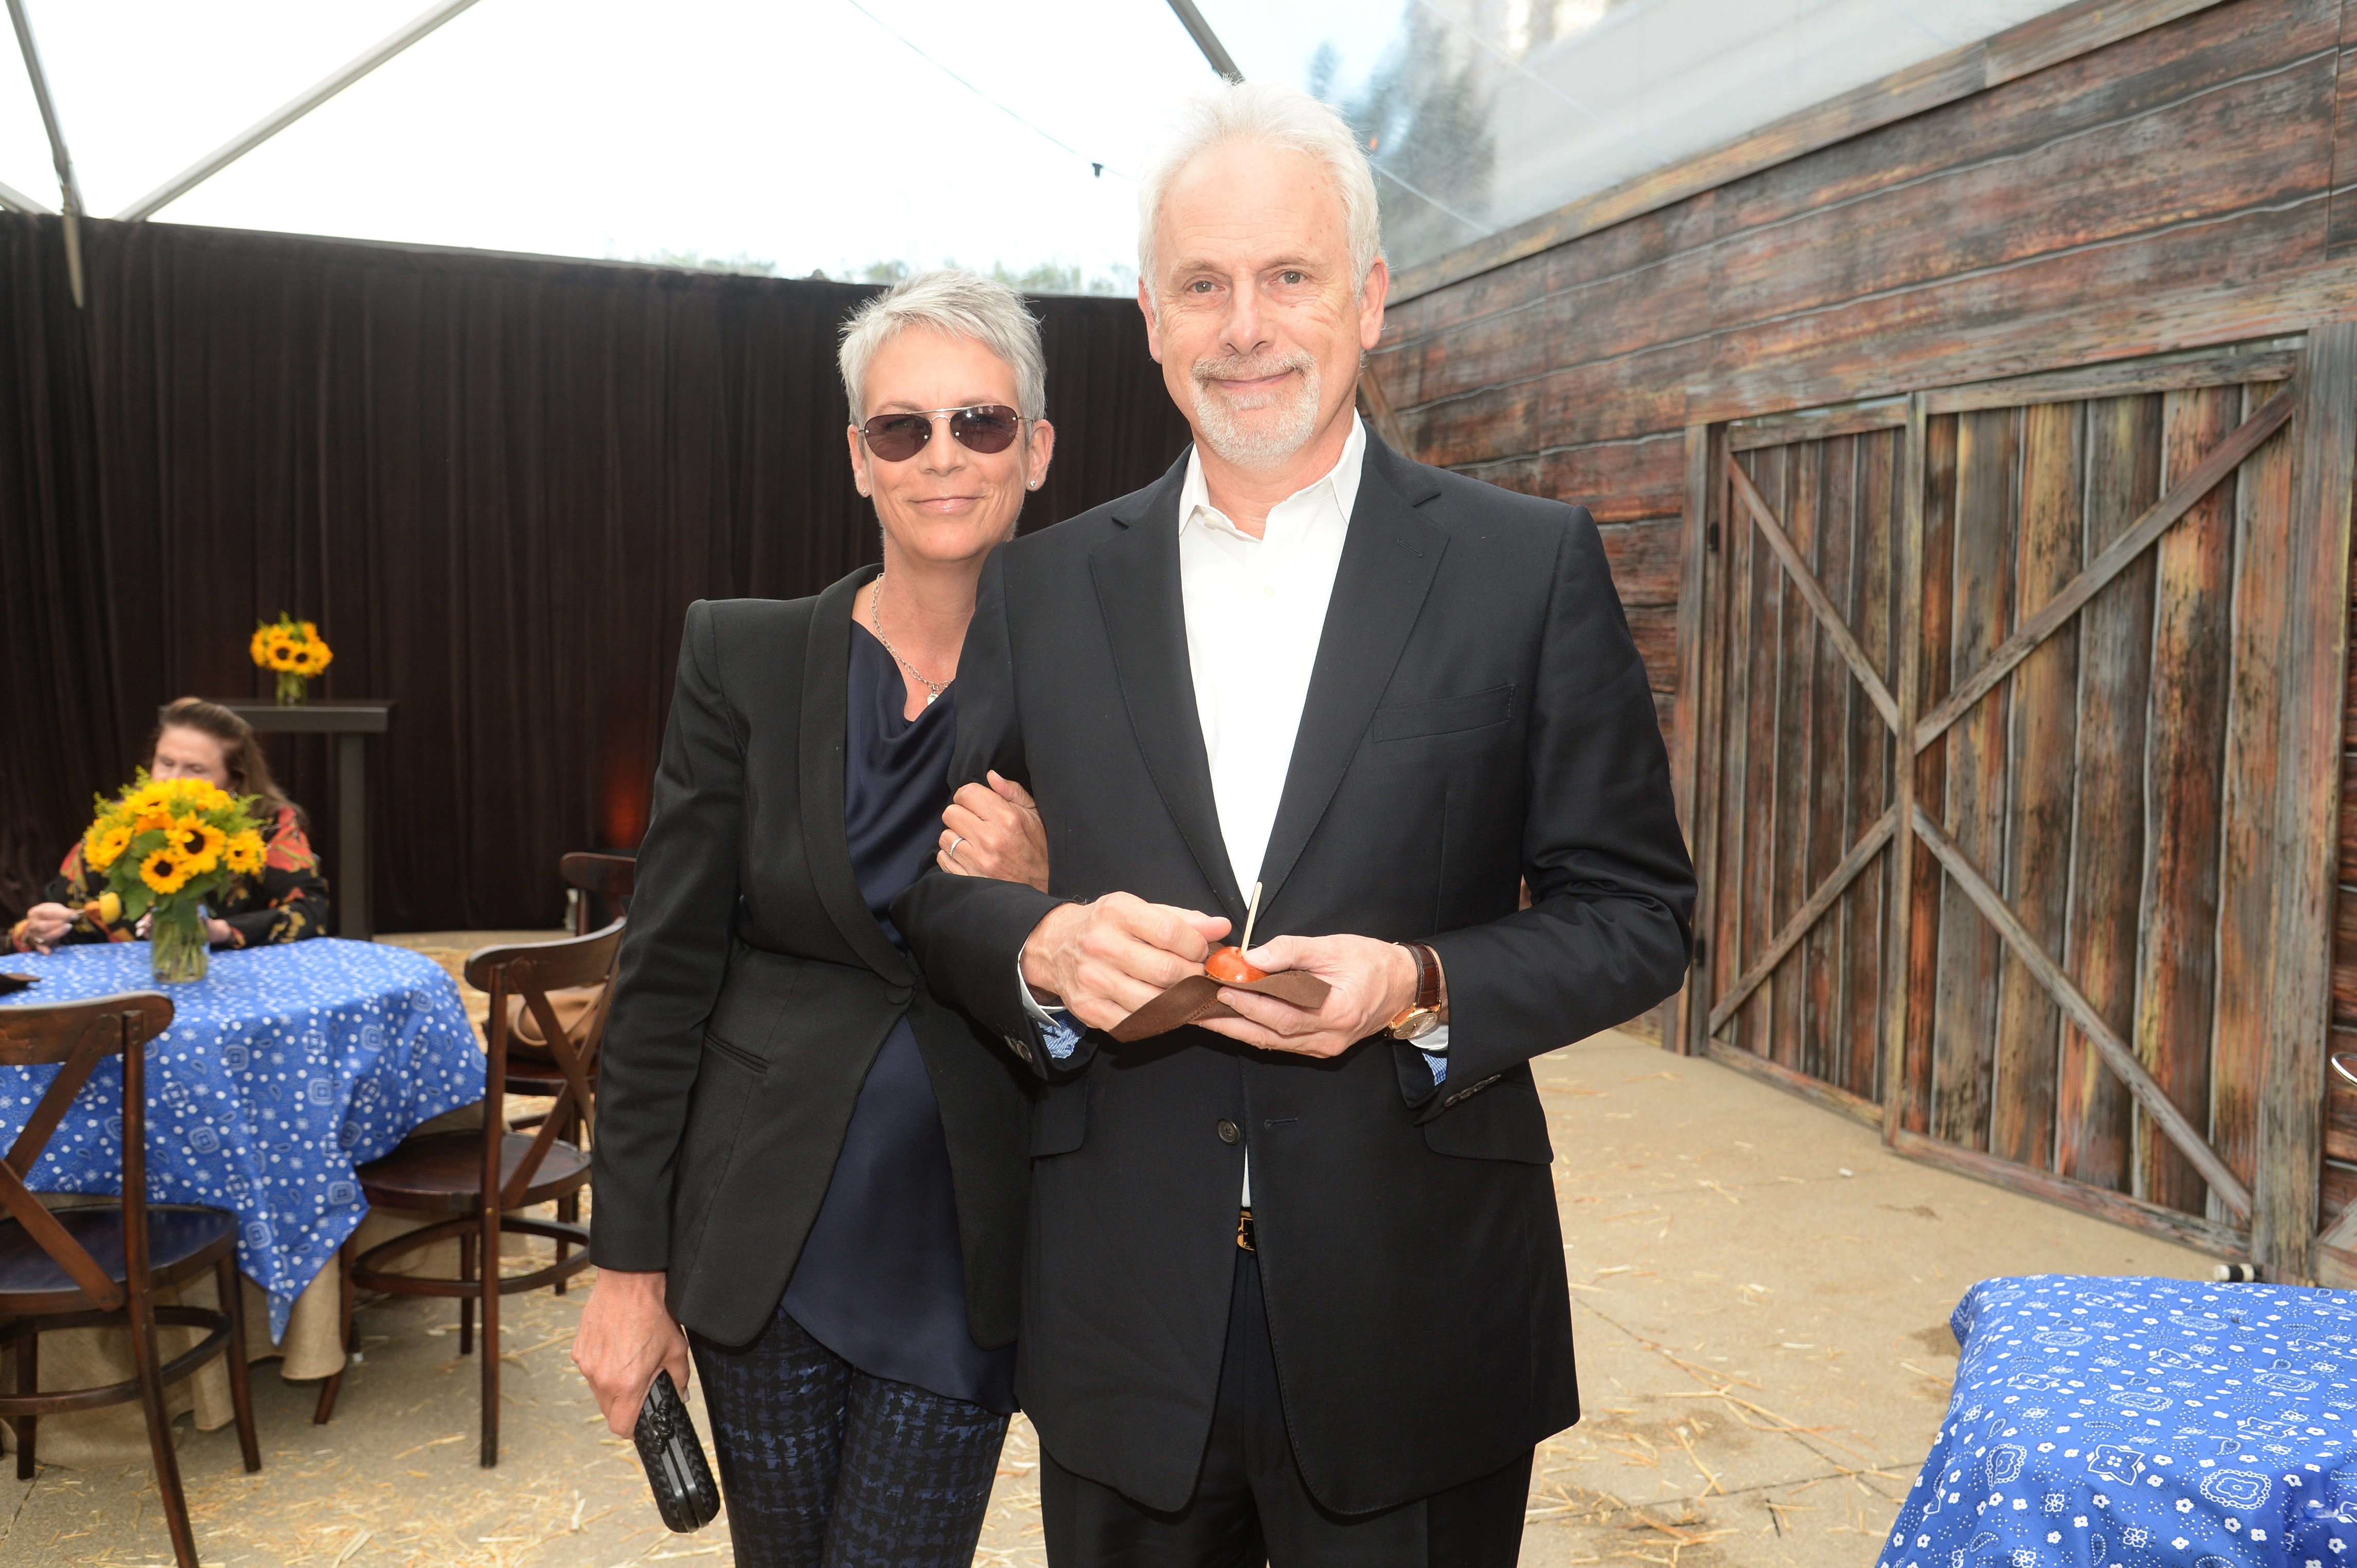 Jamie Lee Curtis and Christopher Guest attended the Annenberg Space for Photography Opening Celebration for "Country, Portraits of an American Sound" at the Annenberg Space for Photography on May 22, 2014, in Century City, California. | Source: Getty Images